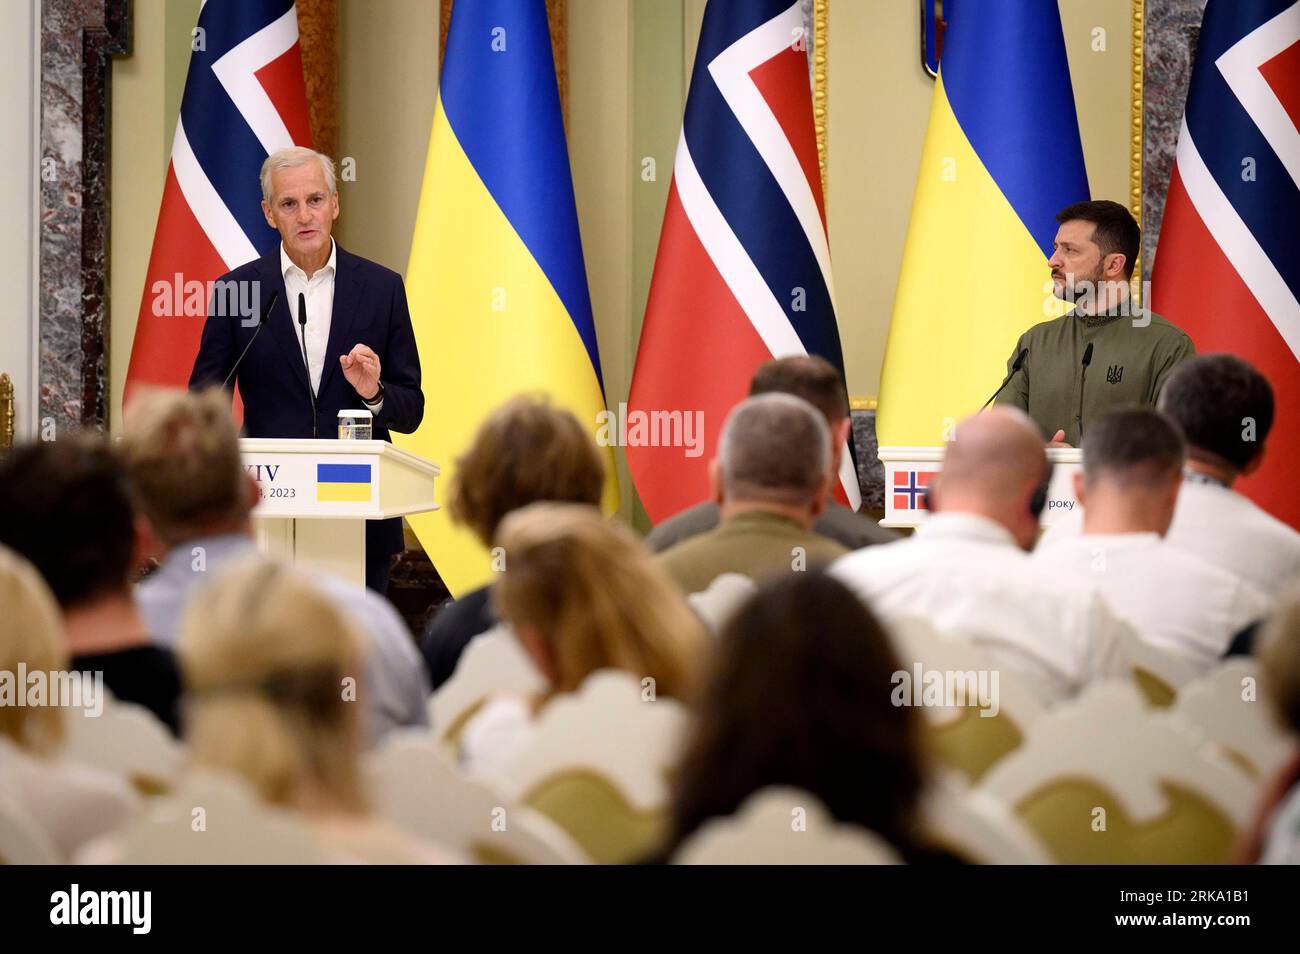 Kyiv, Ukraine. 24th Aug, 2023. Norwegian Prime-Minister Jonas Gahr Store (L) speaks as Ukrainian President Volodymyr Zelensky (R) looks on during a press conference on Ukraine's 32nd Independence Day in Kyiv, Ukraine on Thursday, August 24, 2023. Photo by Ukrainian President Press Office/ Credit: UPI/Alamy Live News Stock Photo